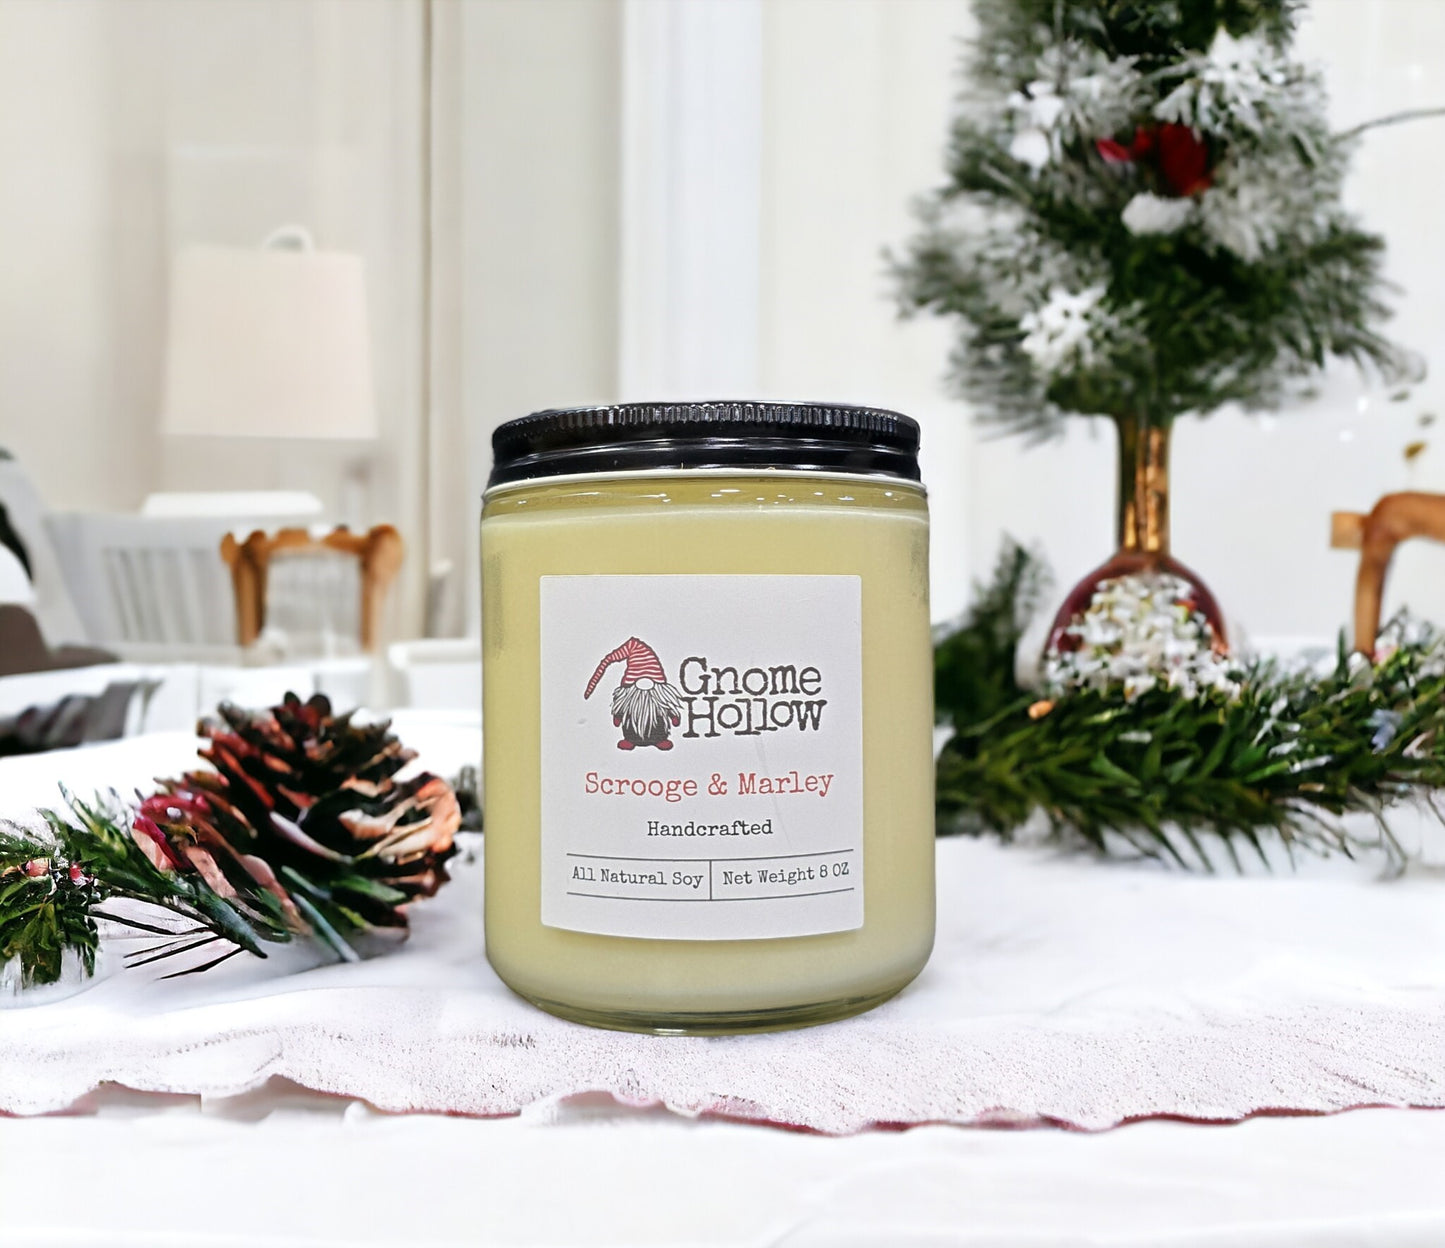 Scrooge & Marley Scented Soy Candle